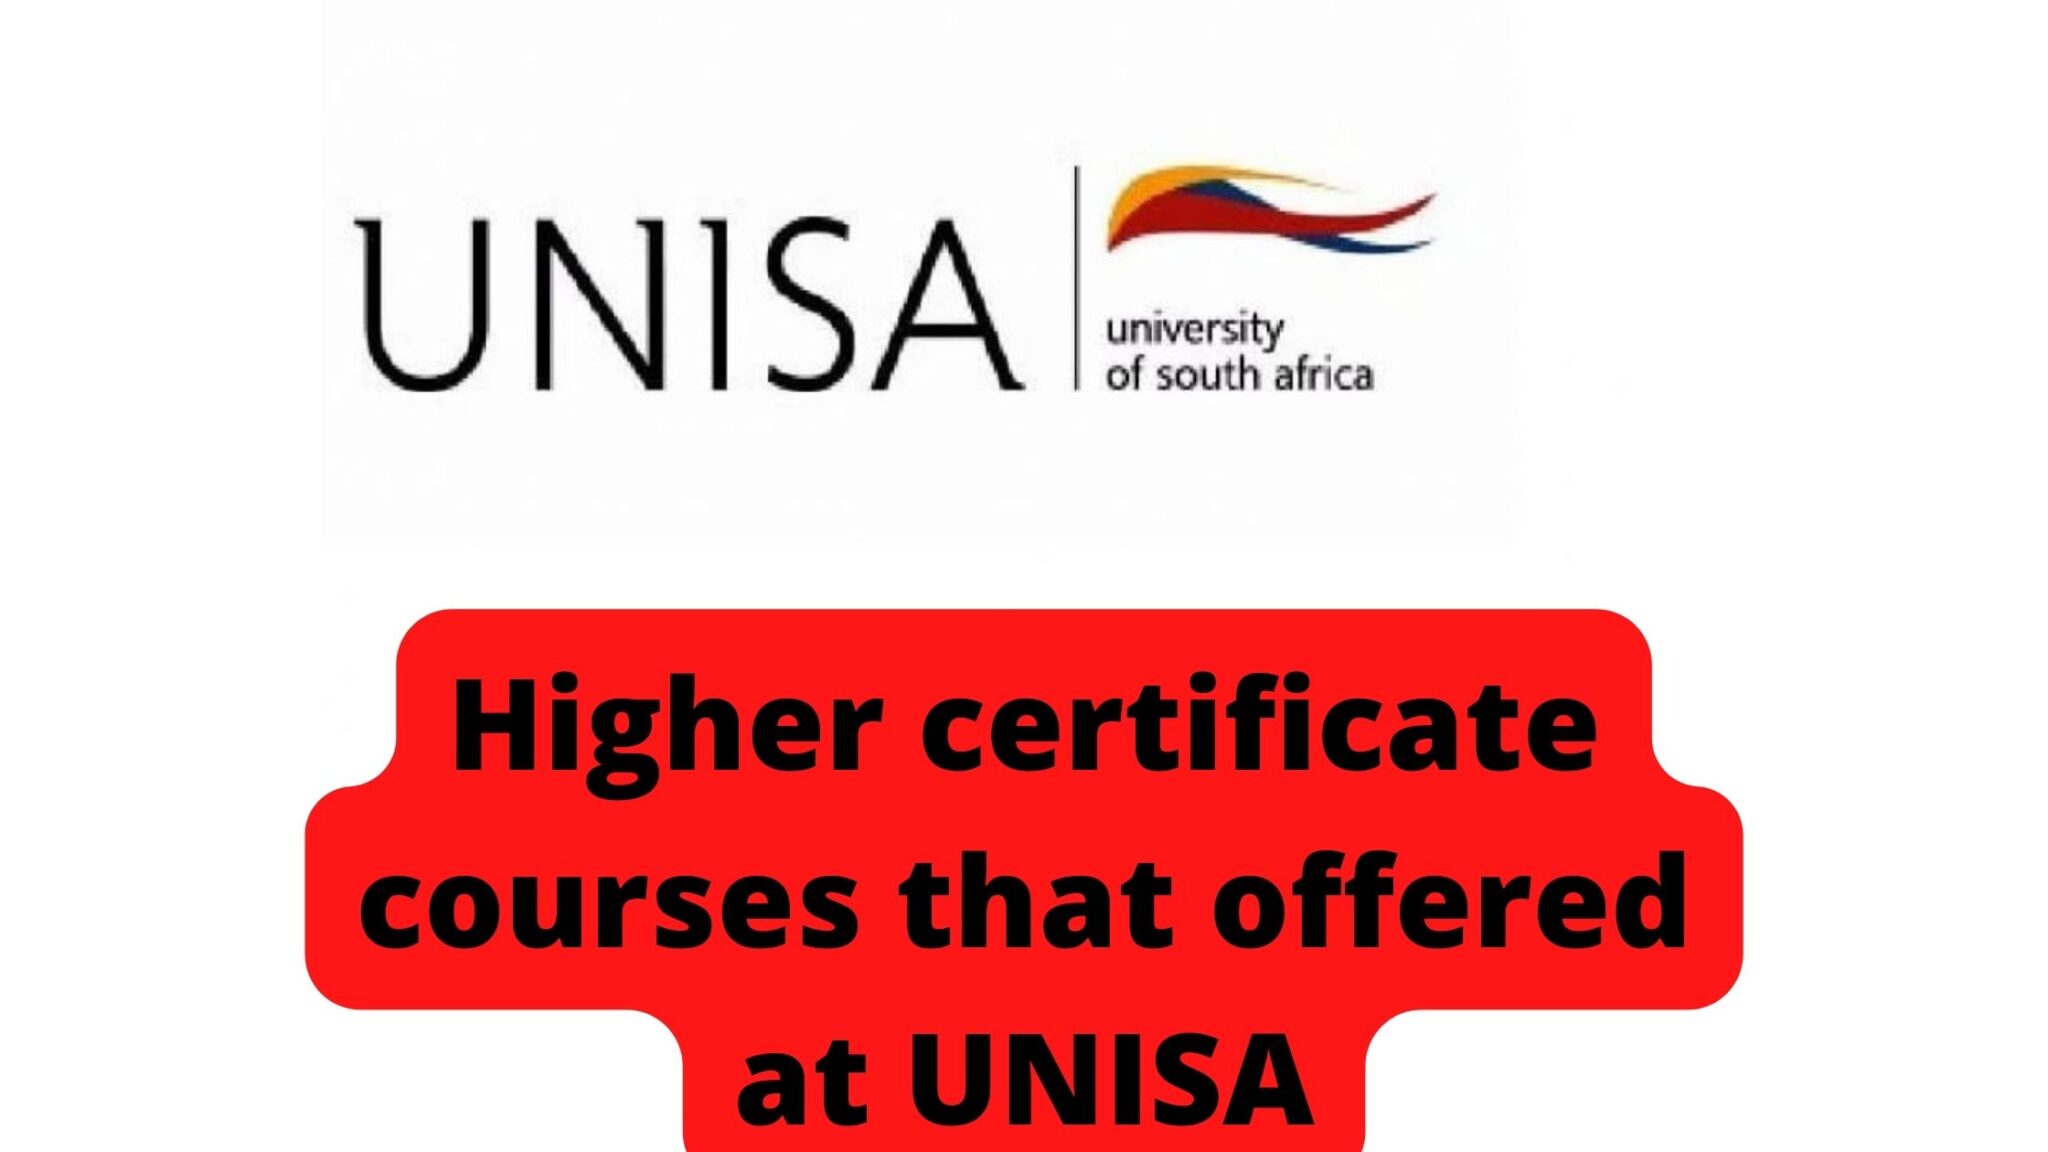 #39 #39 Higher certificate courses that offered at UNISA #39 #39 Archives LINK IN